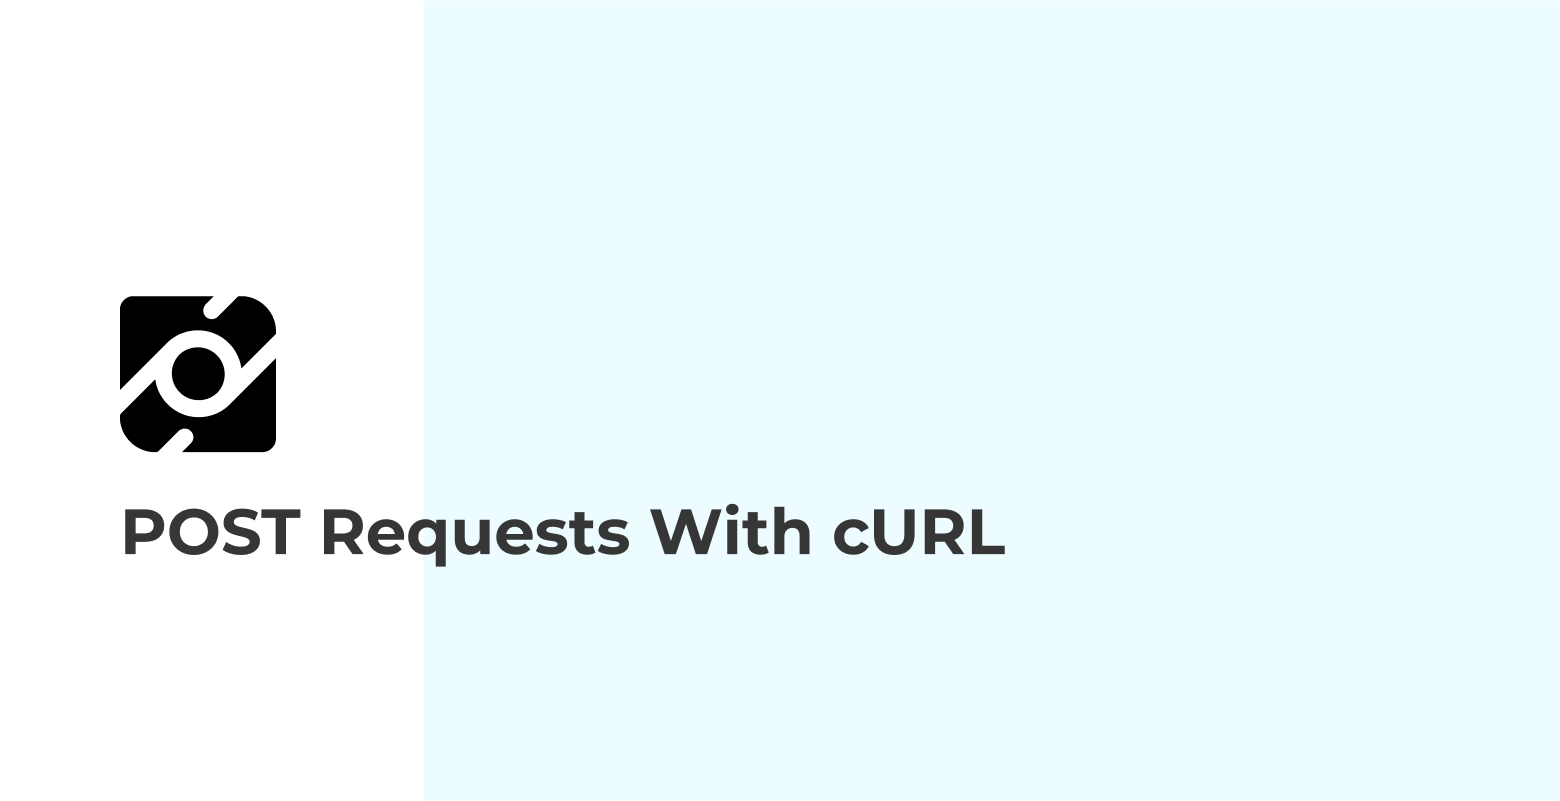 POST Requests With cURL